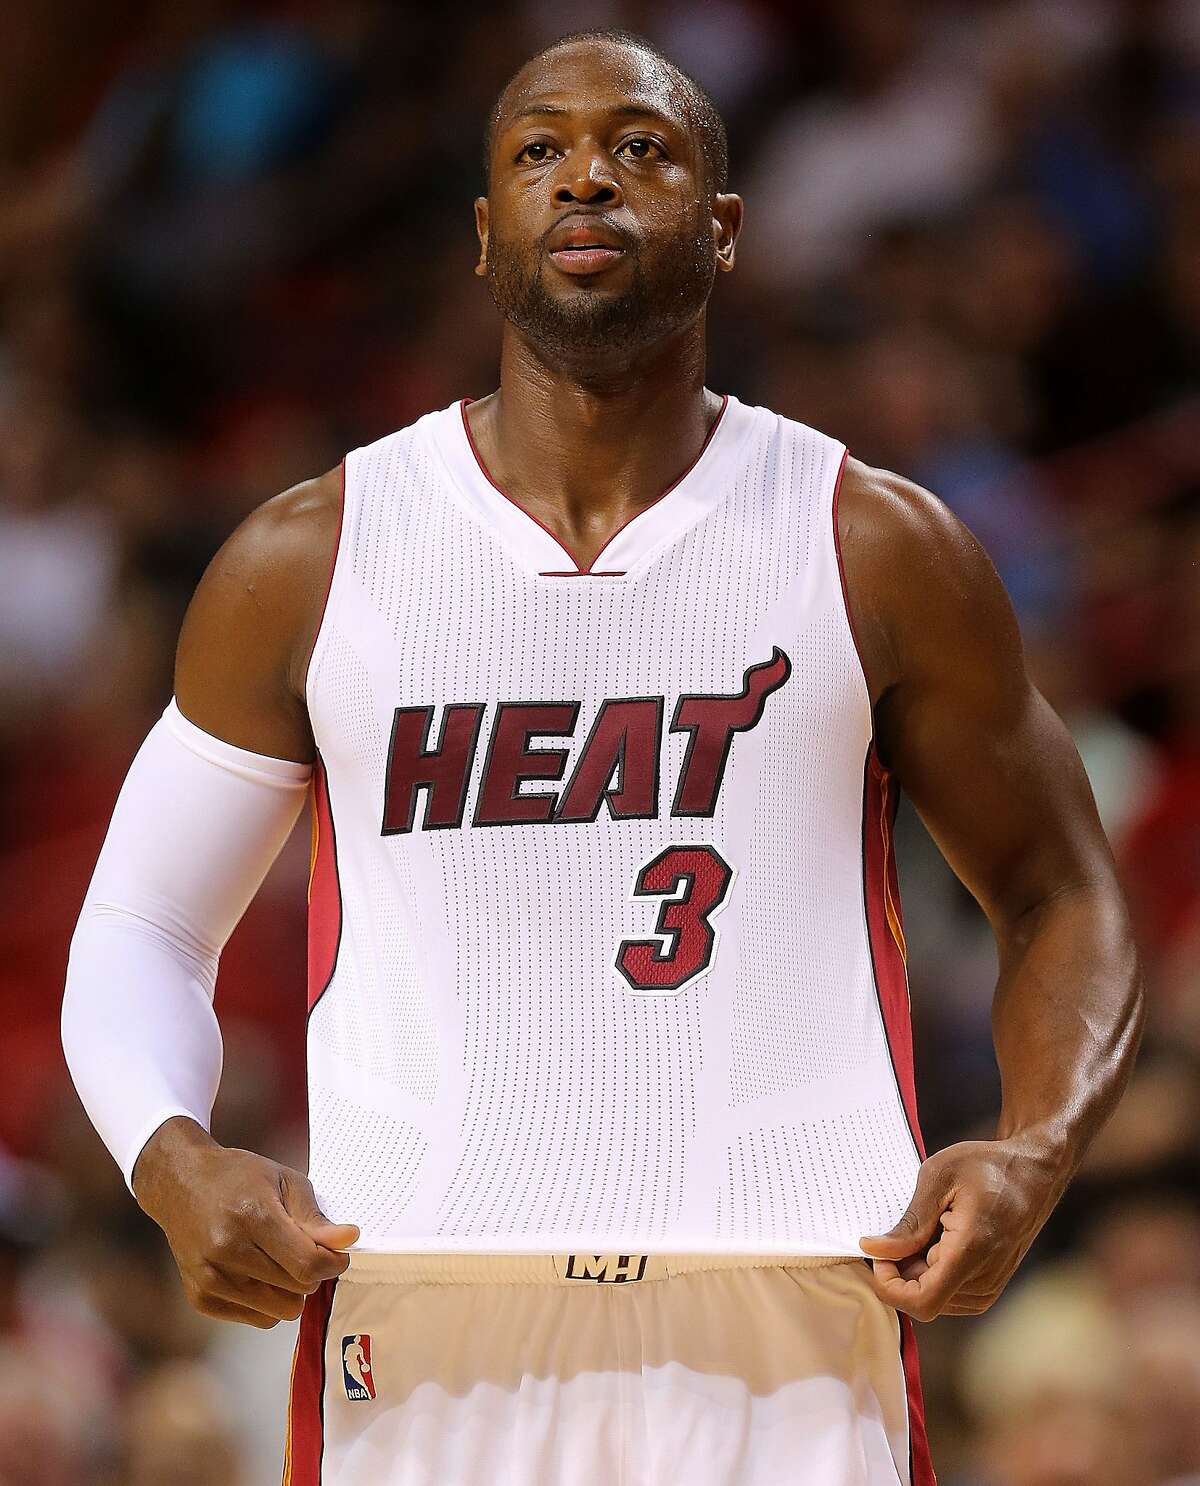 MIAMI, FL - OCTOBER 21: Dwyane Wade #3 of the Miami Heat looks on during a preseason game against the Washington Wizards at American Airlines Arena on October 21, 2015 in Miami, Florida. NOTE TO USER: User expressly acknowledges and agrees that, by downloading and/or using this photograph, user is consenting to the terms and conditions of the Getty Images License Agreement. Mandatory copyright notice: (Photo by Mike Ehrmann/Getty Images)